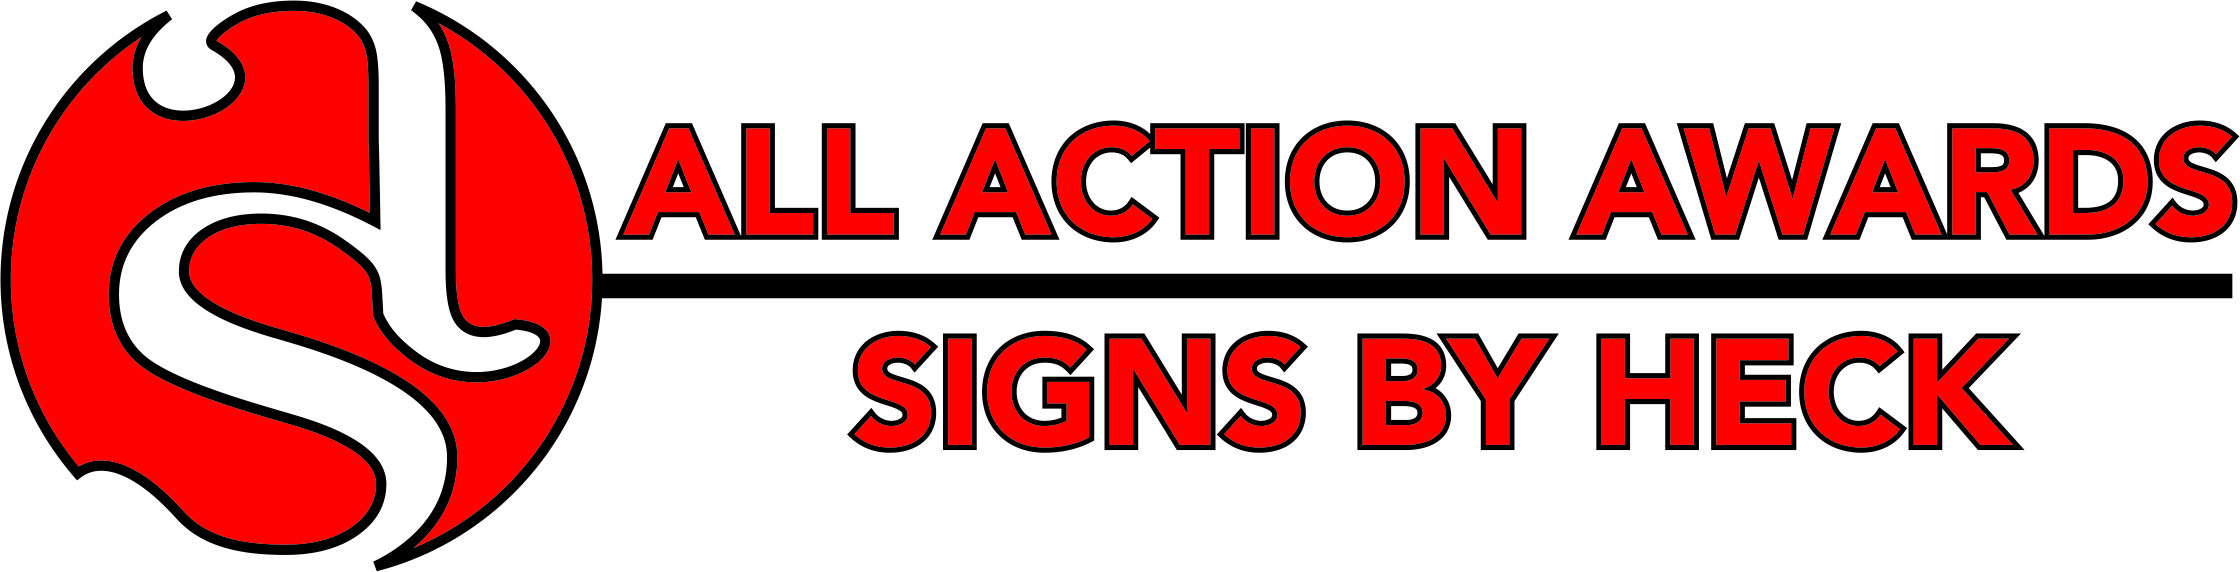 All Action Awards & Signs By Heck's Logo